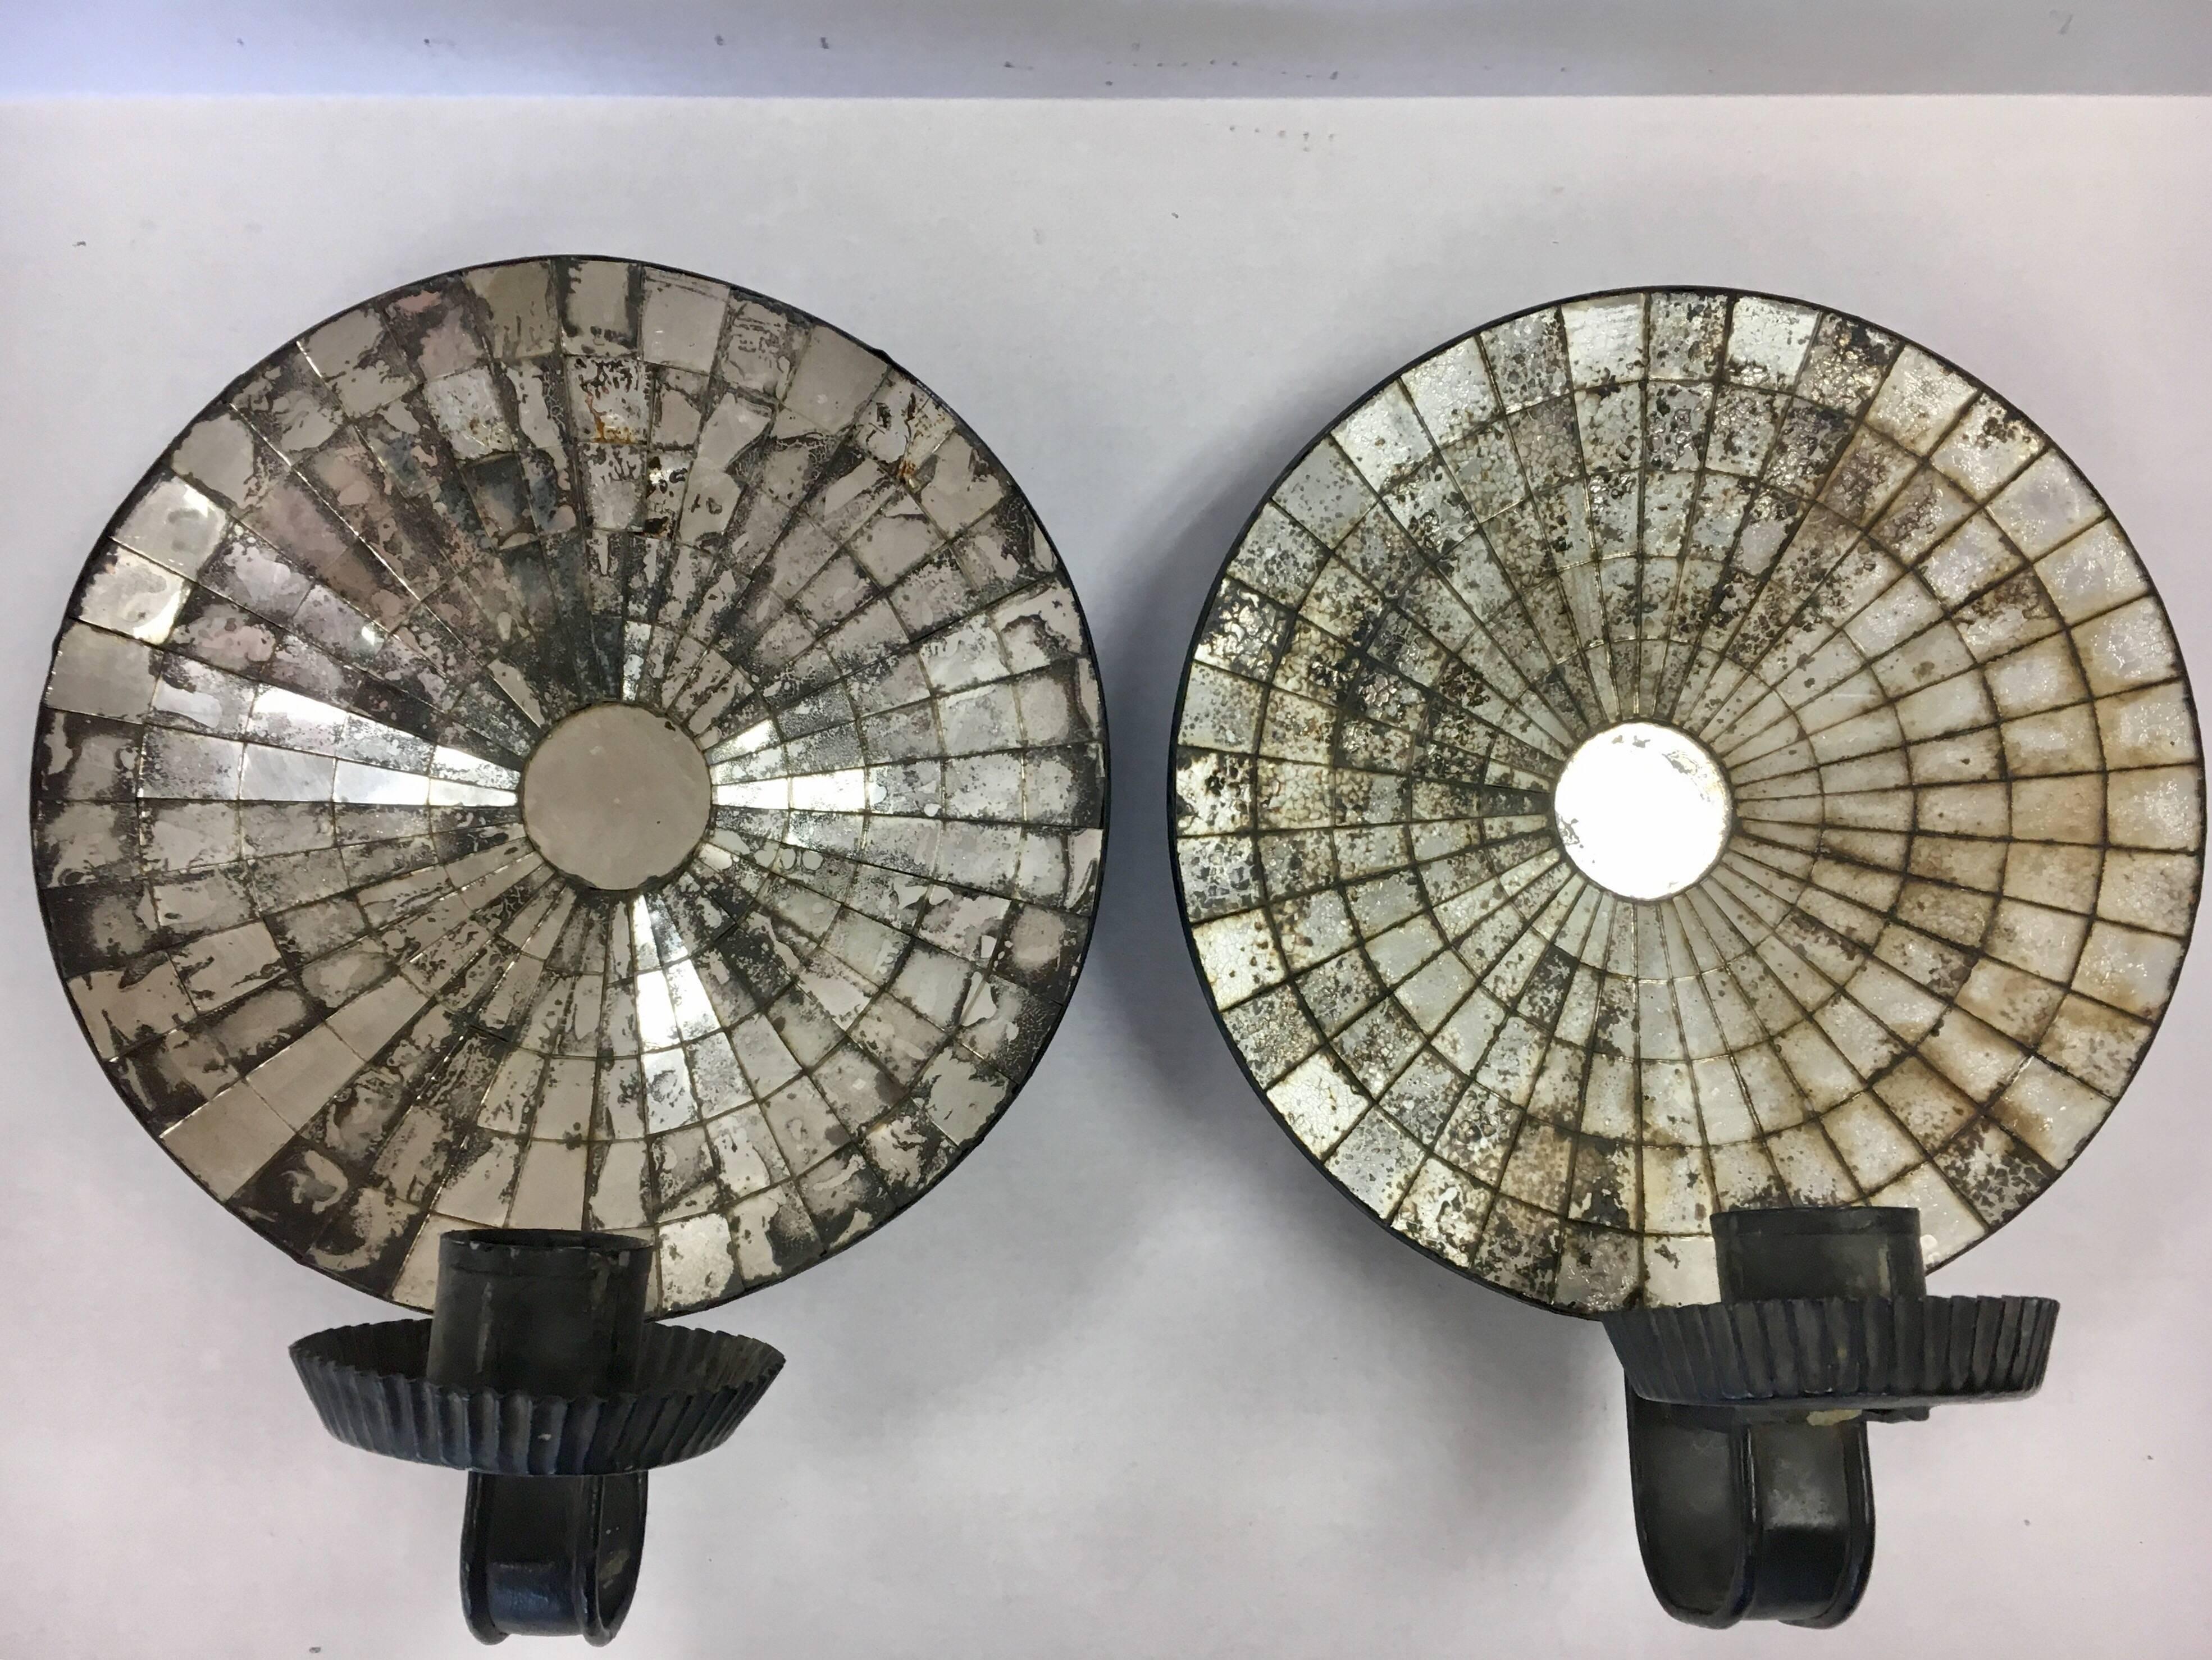 Coveted pair of American colonial tole and mirrored candle holders from the late part of the 19th century.
All original. A pair of painted tin candle sconces with mirrored reflectors, from the late 18th century. Having a round convex form in